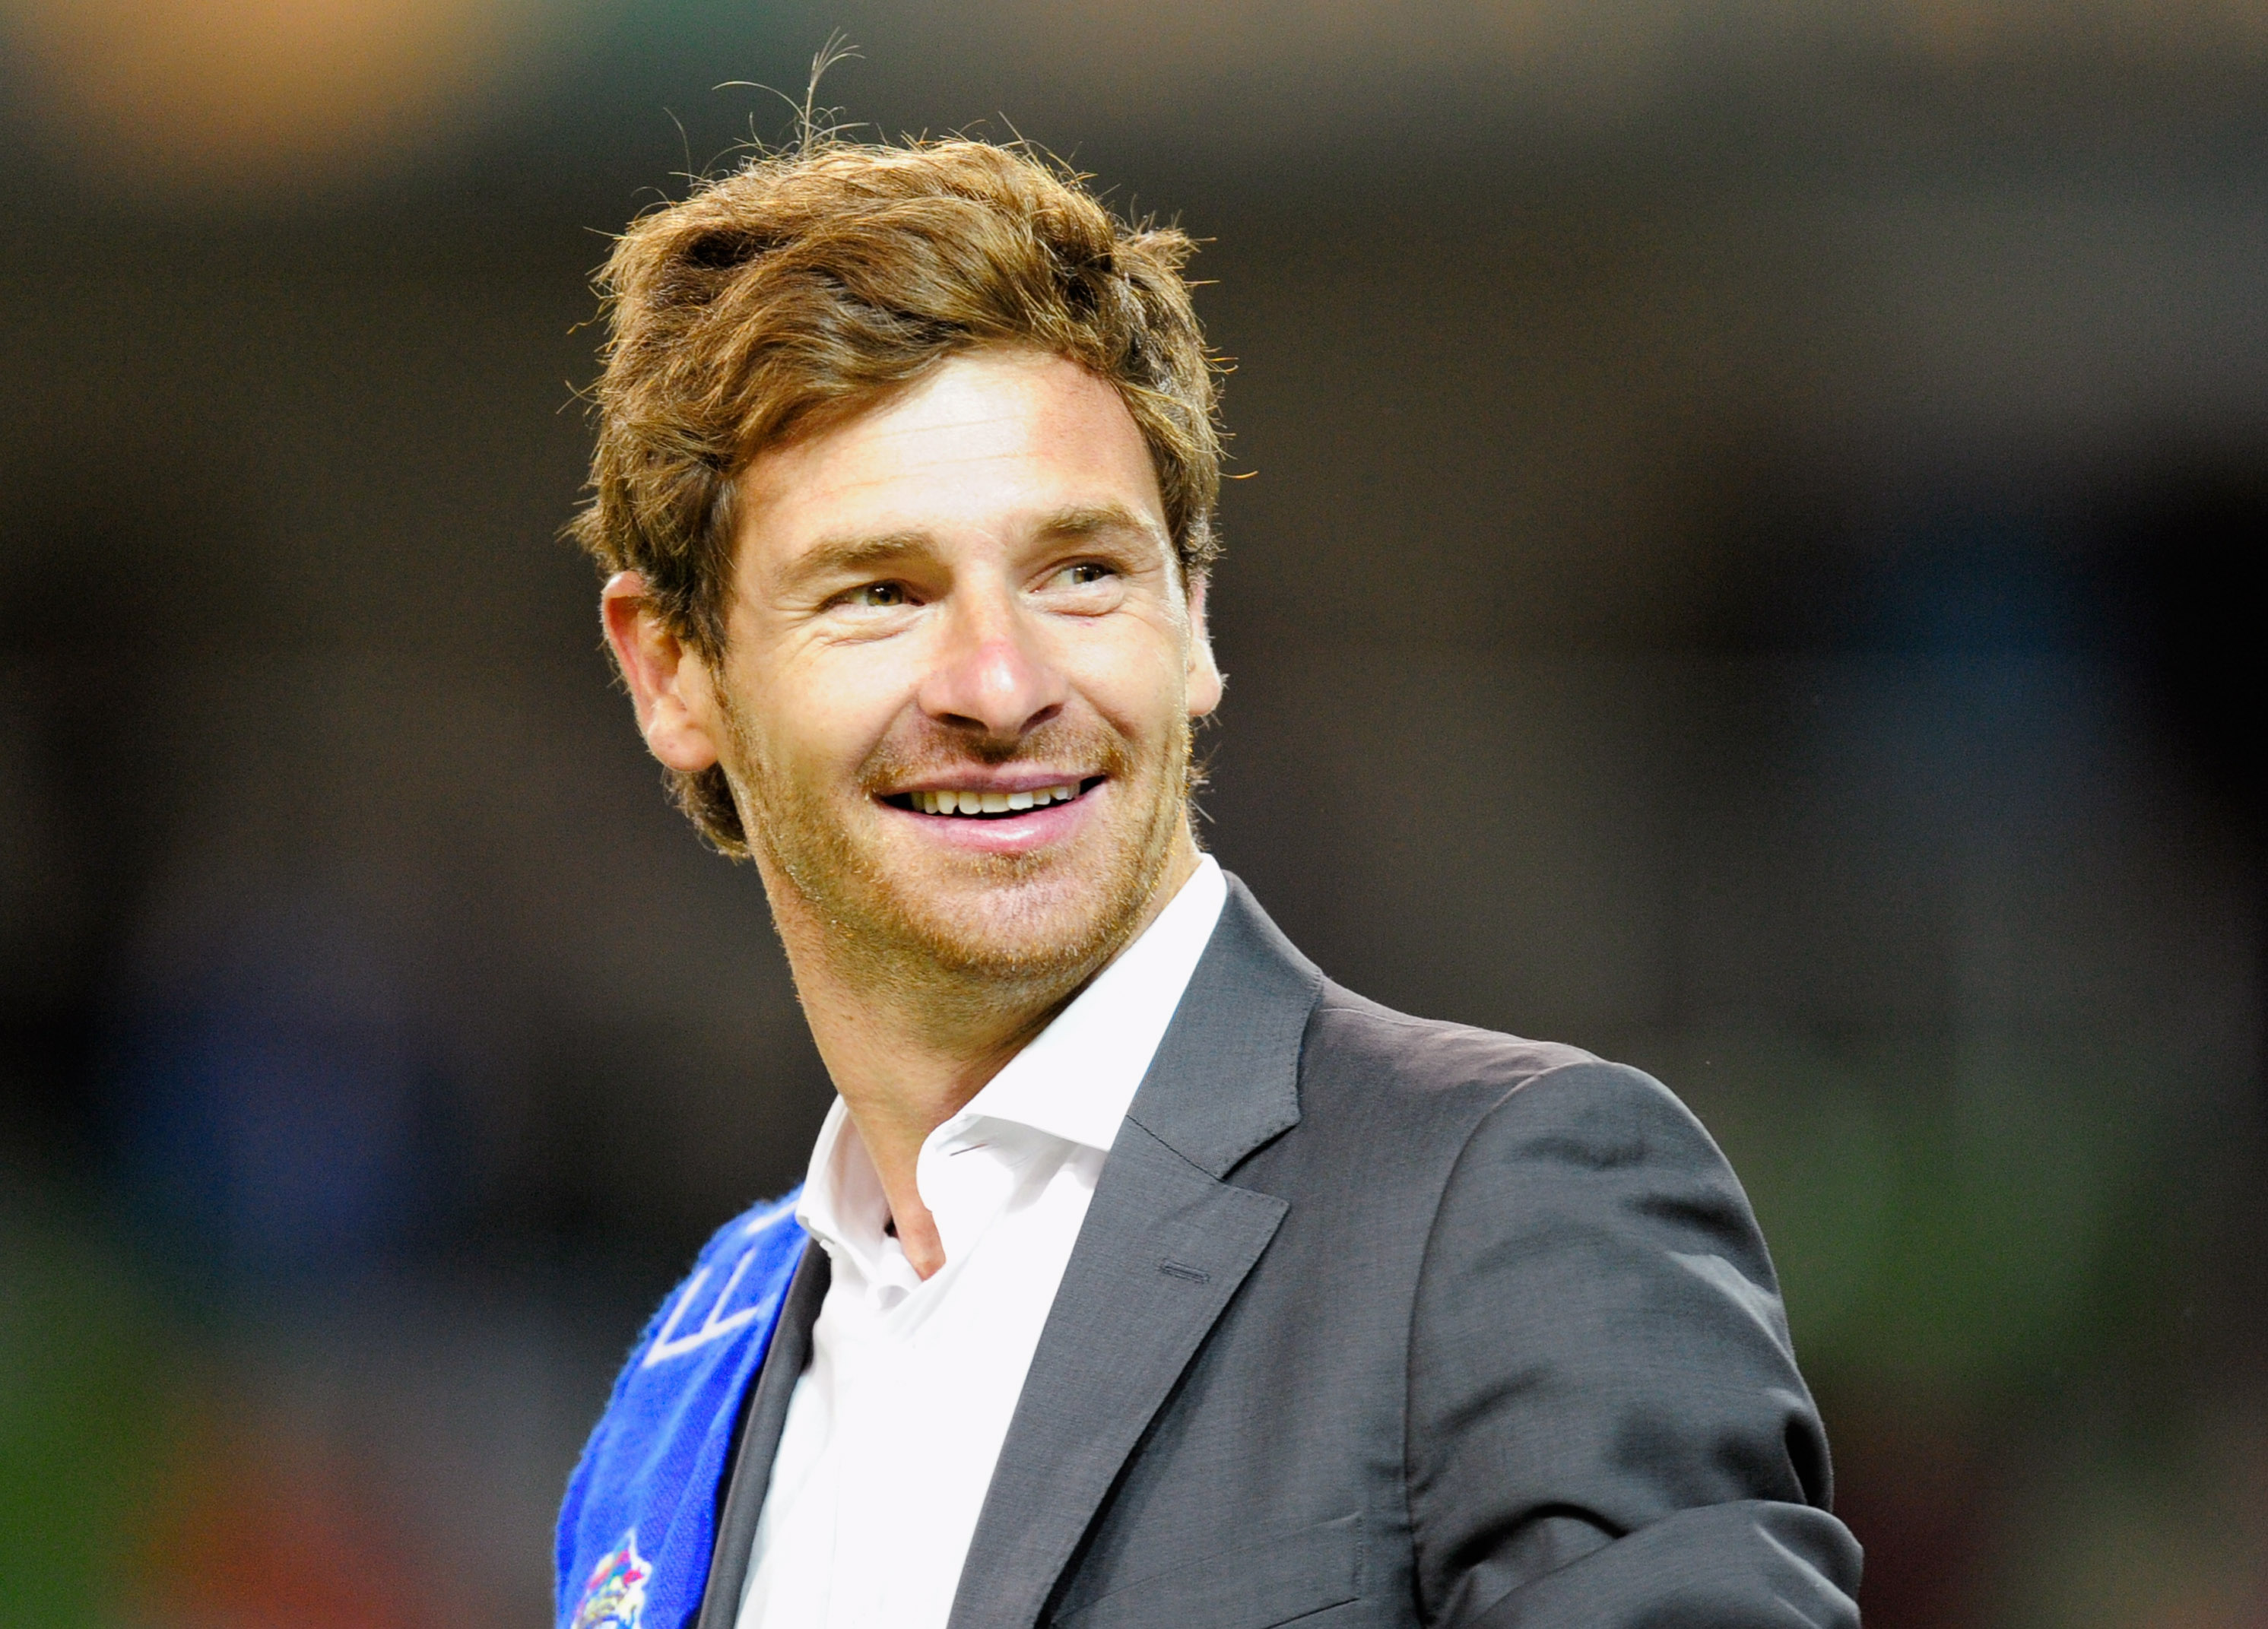 DUBLIN, IRELAND - MAY 18:  FC Porto Head Coach, Andre Villas Boas looks on after the UEFA Europa League Final between FC Porto and SC Braga at Dublin Arena on May 18, 2011 in Dublin, Ireland.  (Photo by Jamie McDonald/Getty Images)